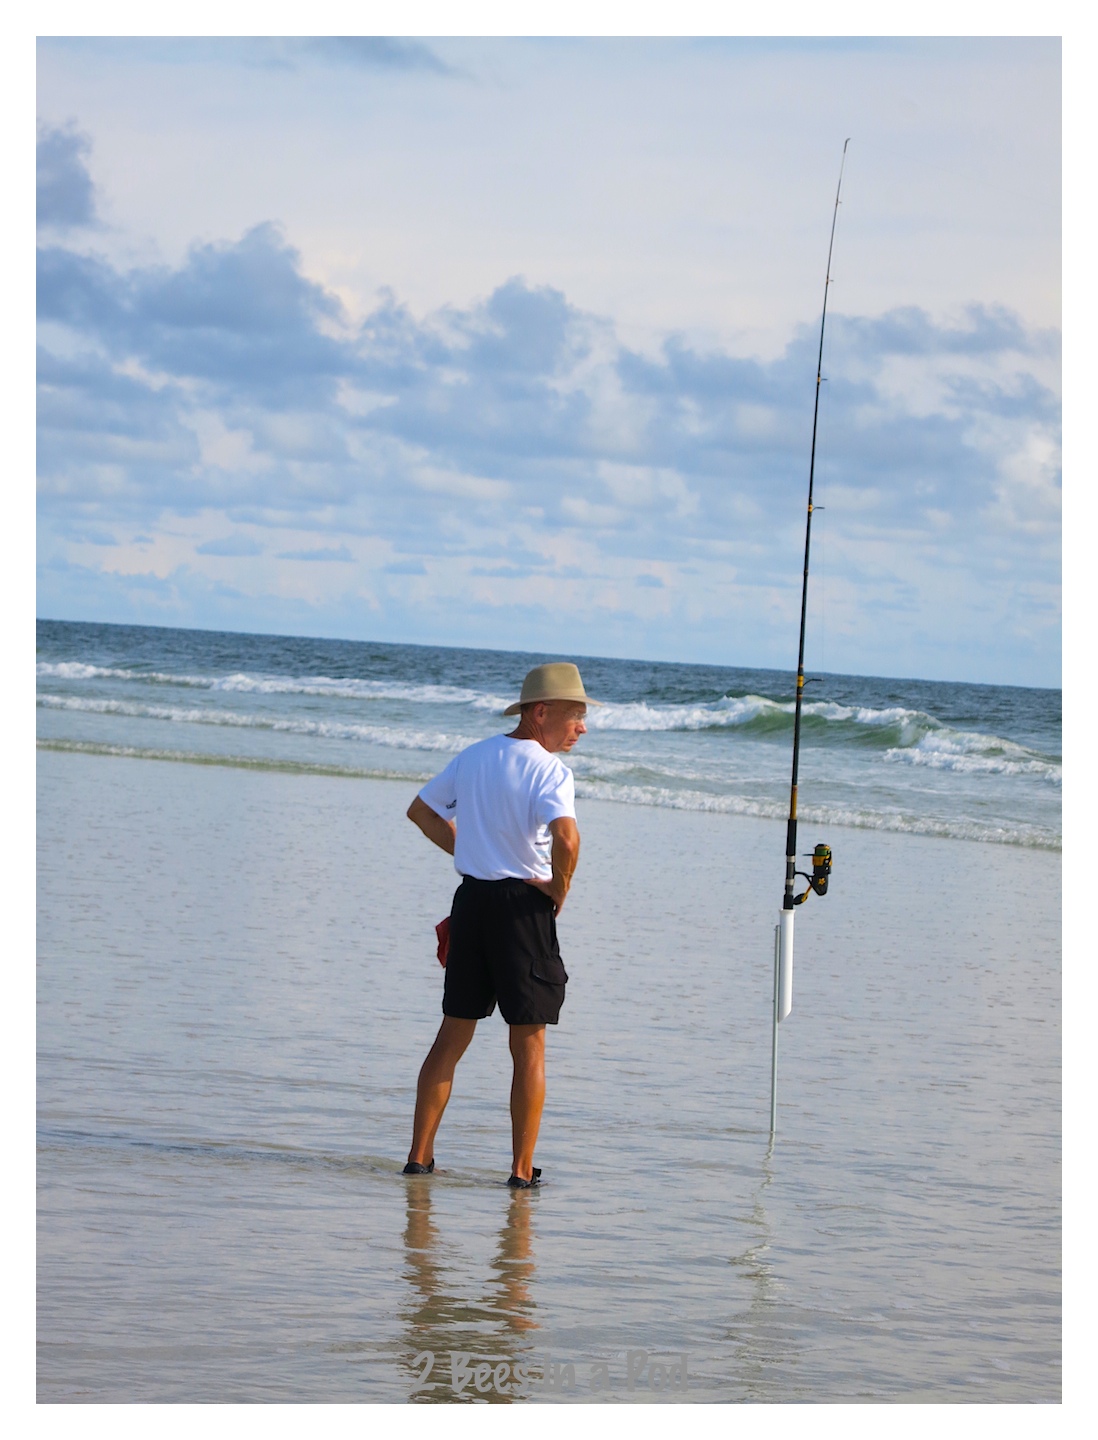 This fisherman crafted his own fishing rod holder with PVC pipe at Crescent Beach, Florida